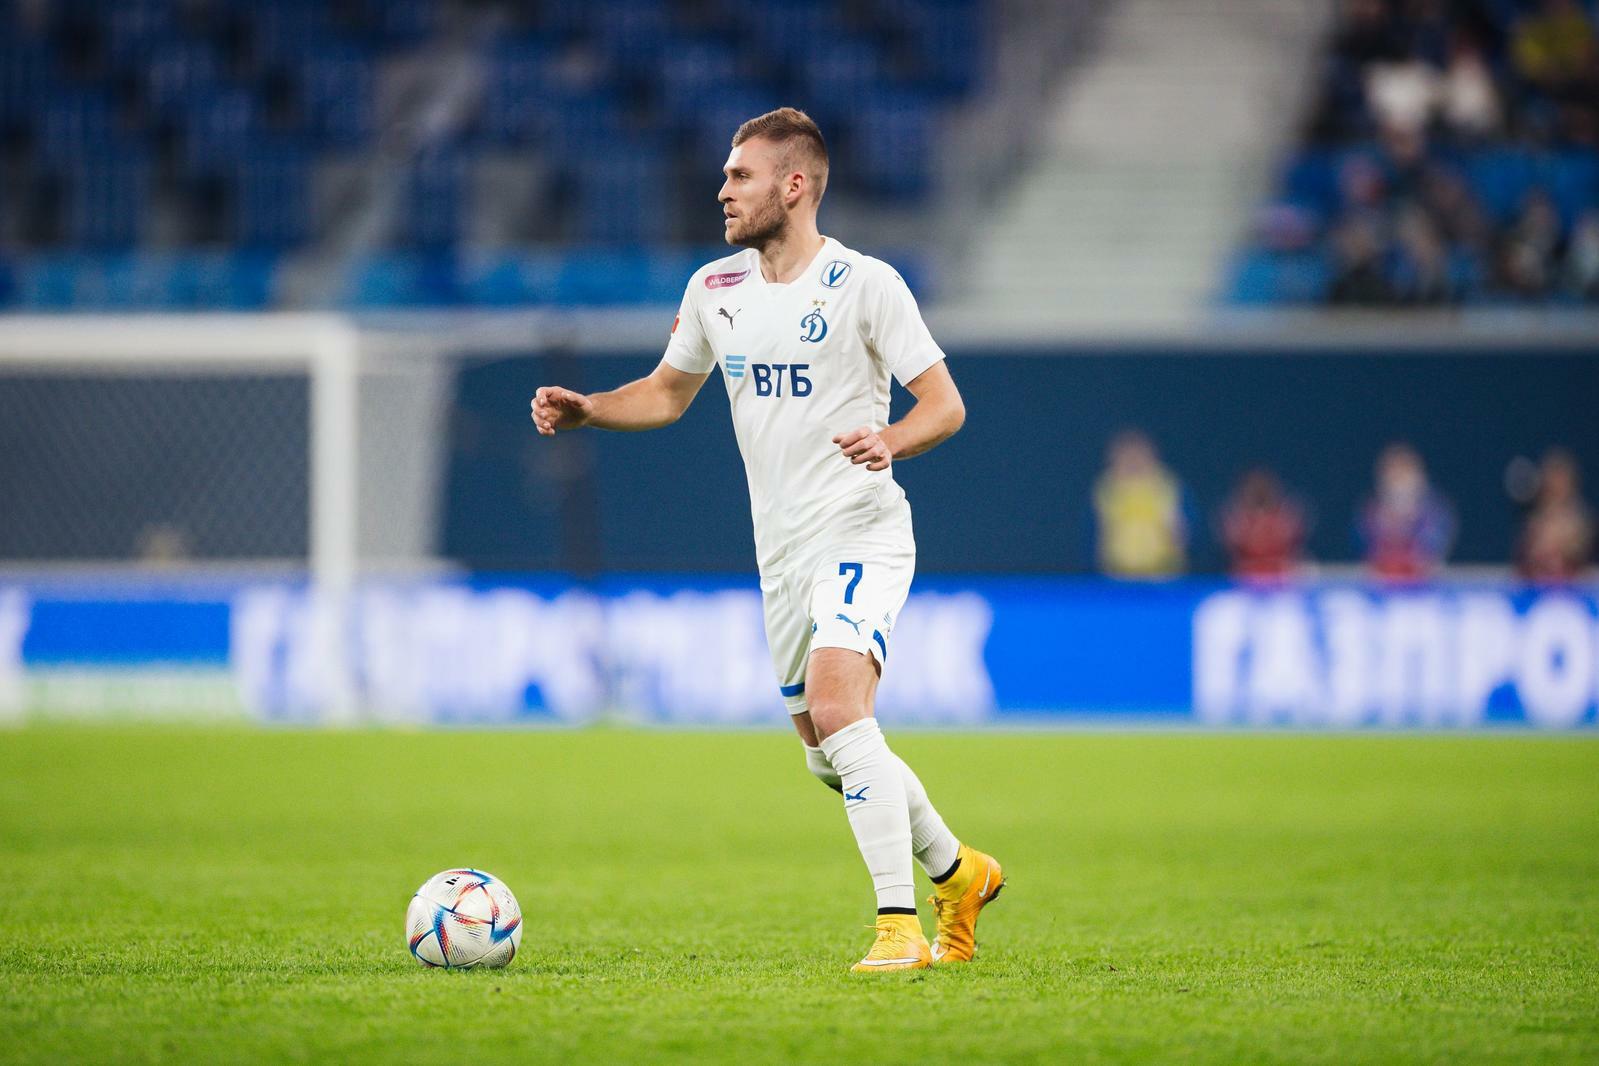 FC Dynamo Moscow News | Dmitry Skopintsev: "I love big matches, where there is excitement and passion on the field." Official club website Dynamo.